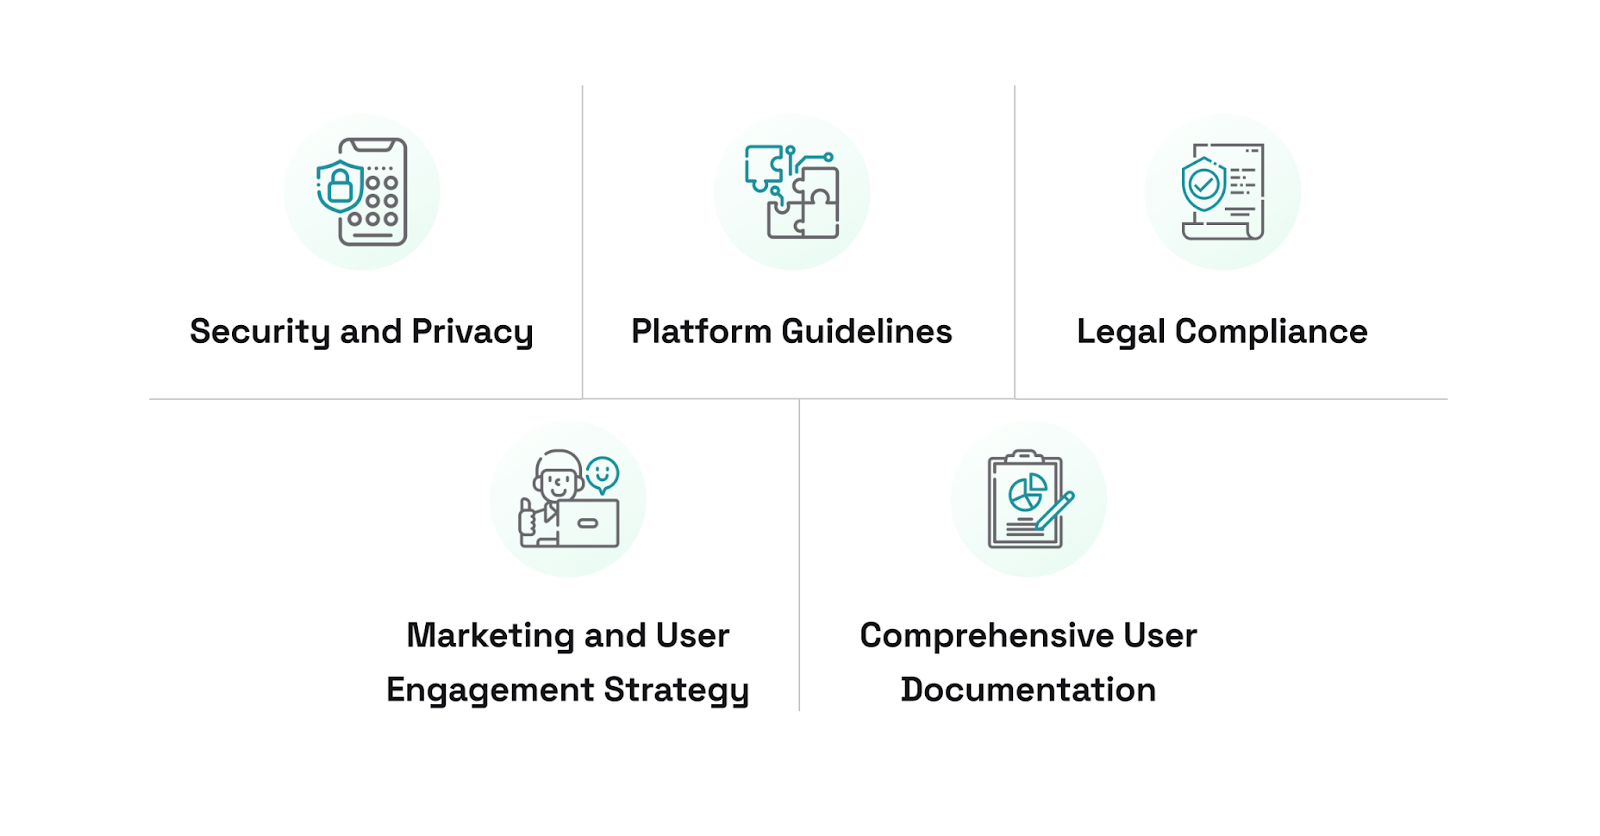 Mobile app redesign checklist
Security and privacy, Platform guidelines, Legal compliance, Marketing and user engagement strategy, Comprehensive user documentation